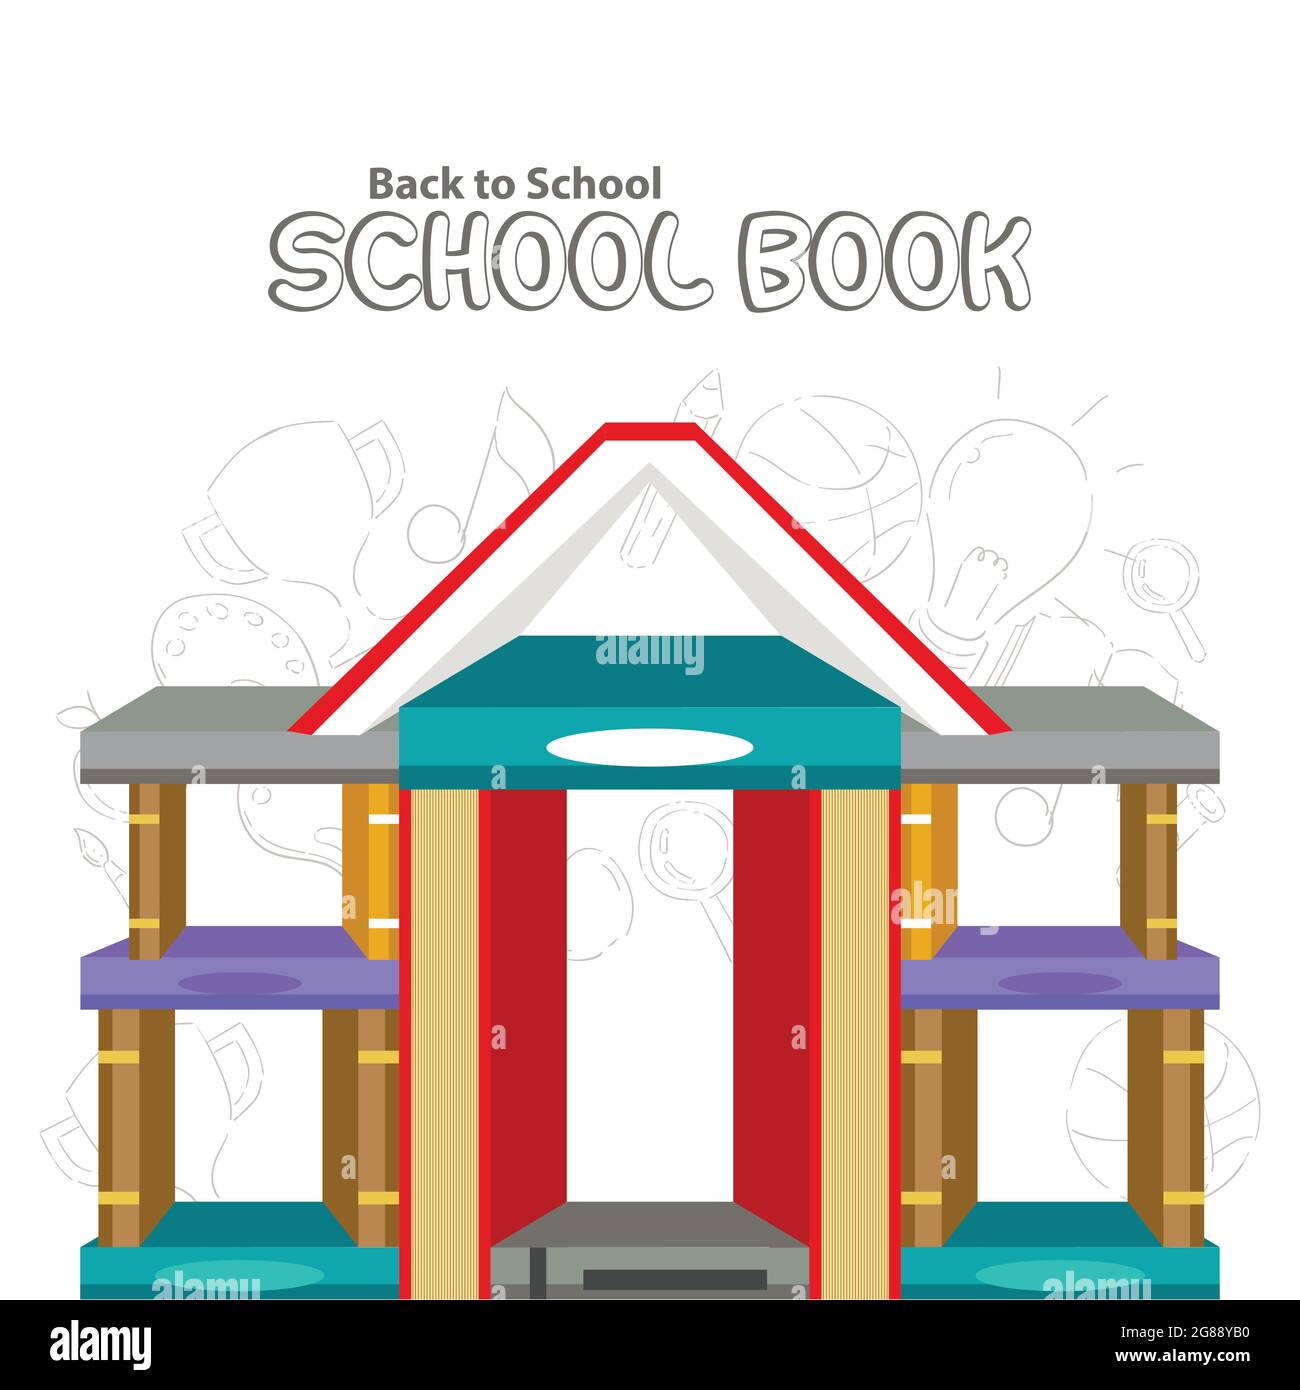 Illustration of Back to School. School building made with using books. Stock Vector